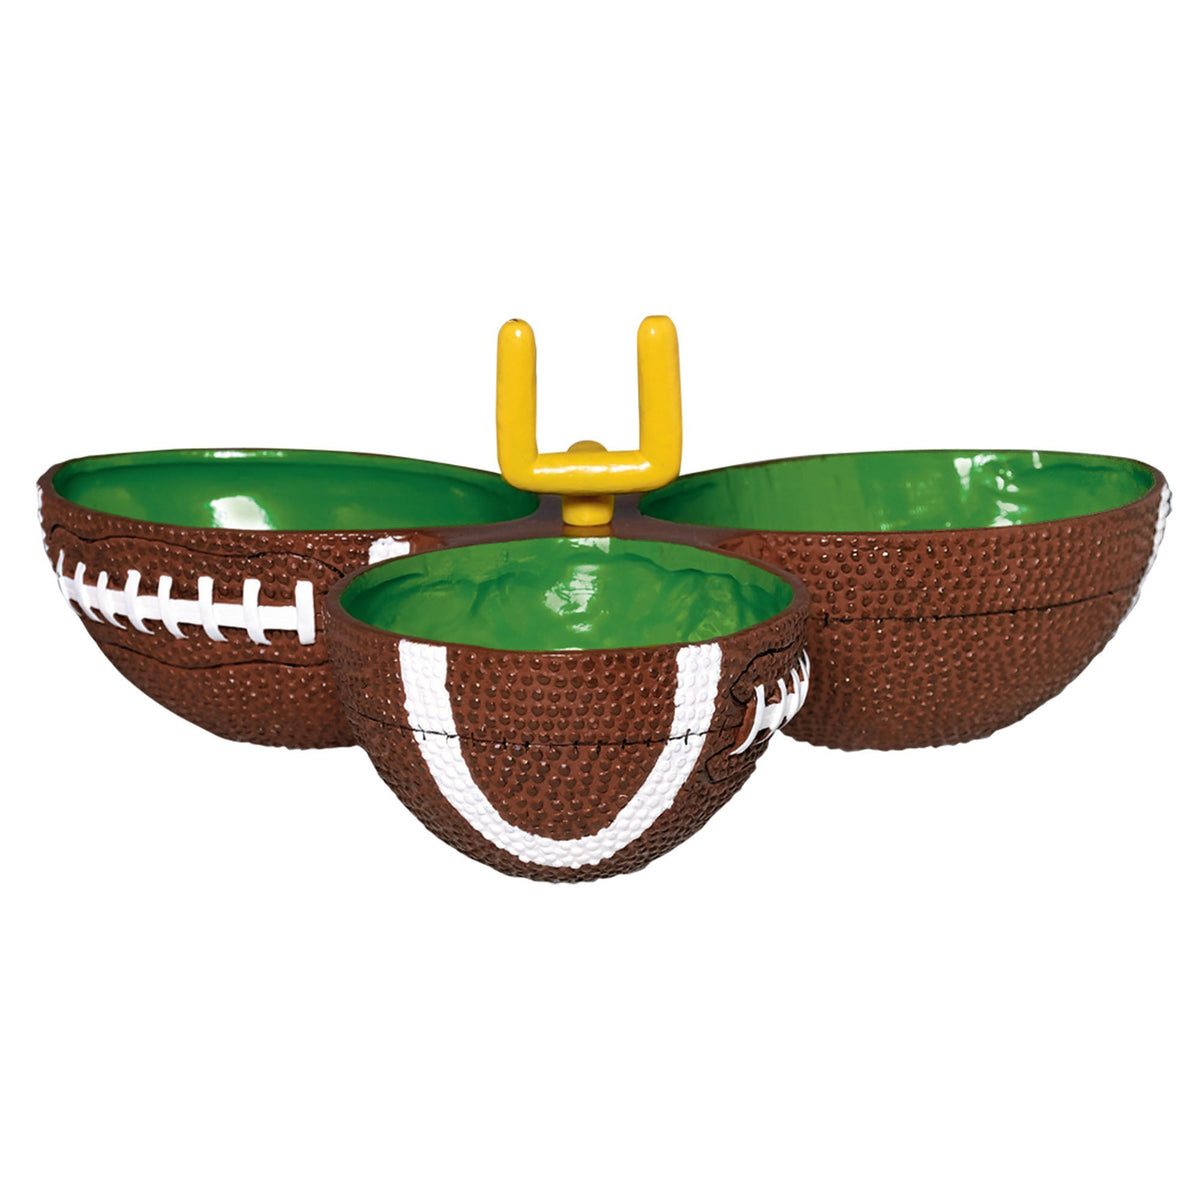 Football Condiment Dish With Goal Posts 9" x 2 3/4"